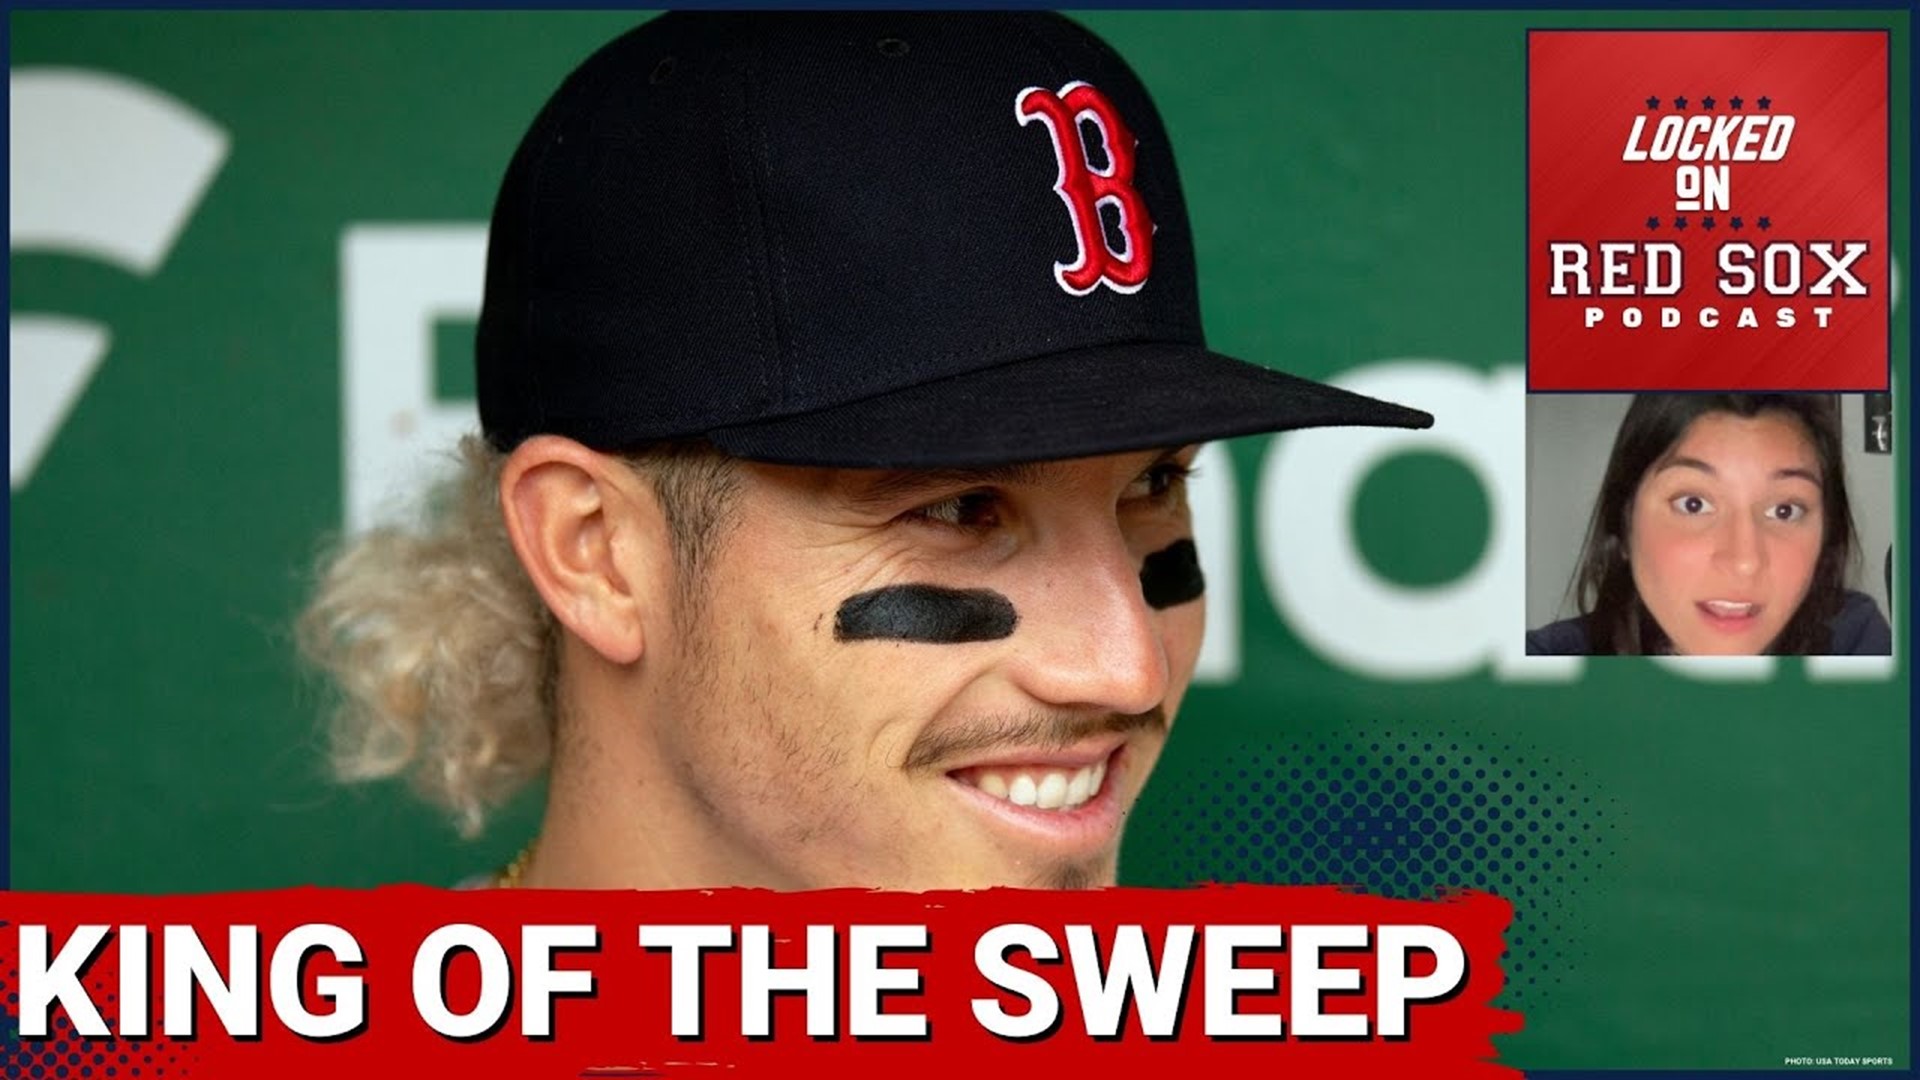 Jarren Duran capitalized on his record-setting performance on Monday night by having a huge series overall as the Boston Red Sox swept the Oakland Athletics.